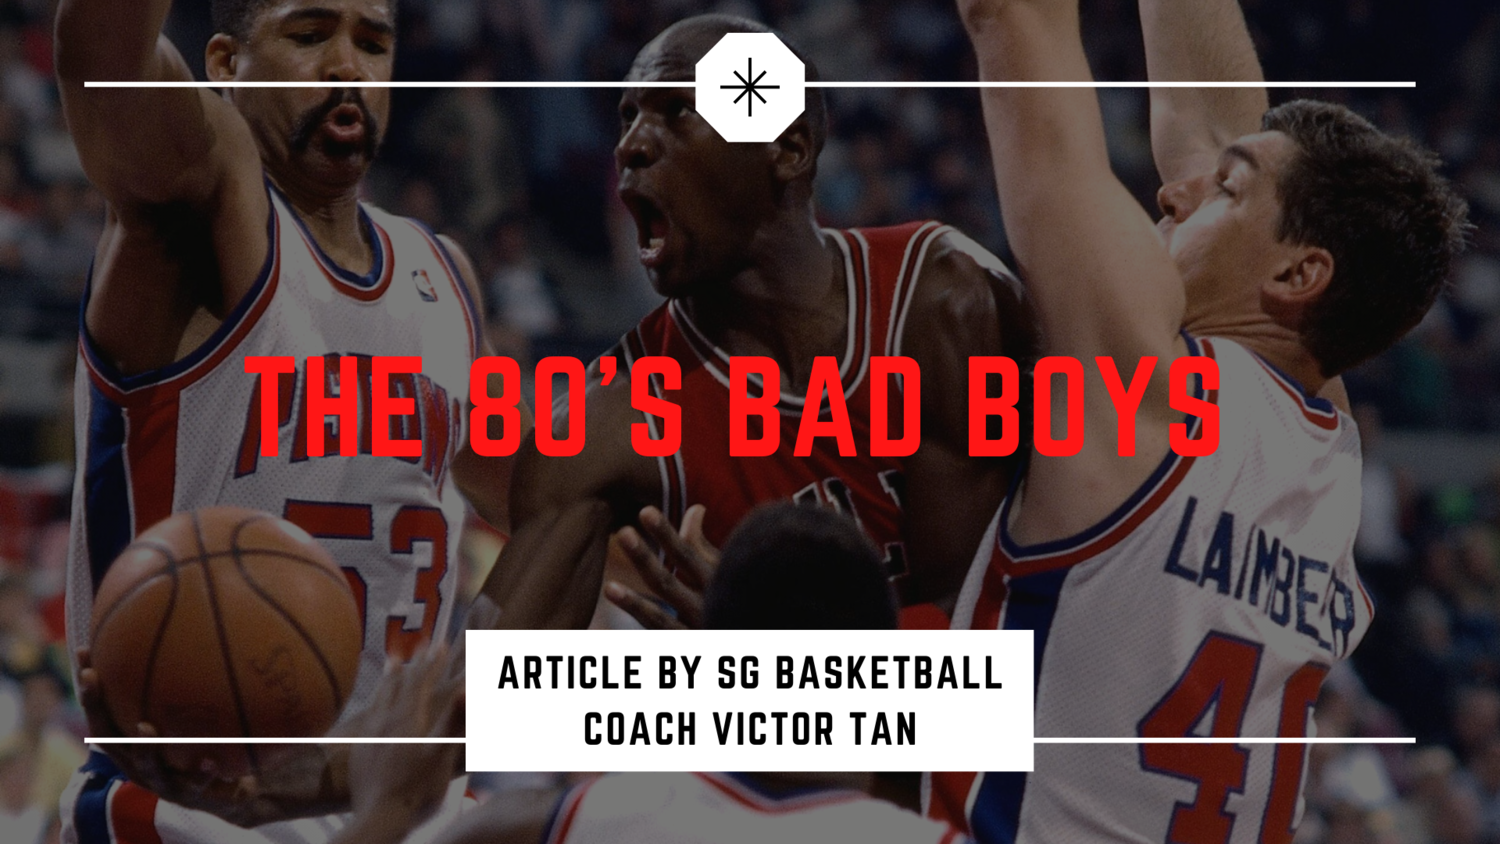 The 80's Bad Boys Detroit Pistons - The team that made Michael